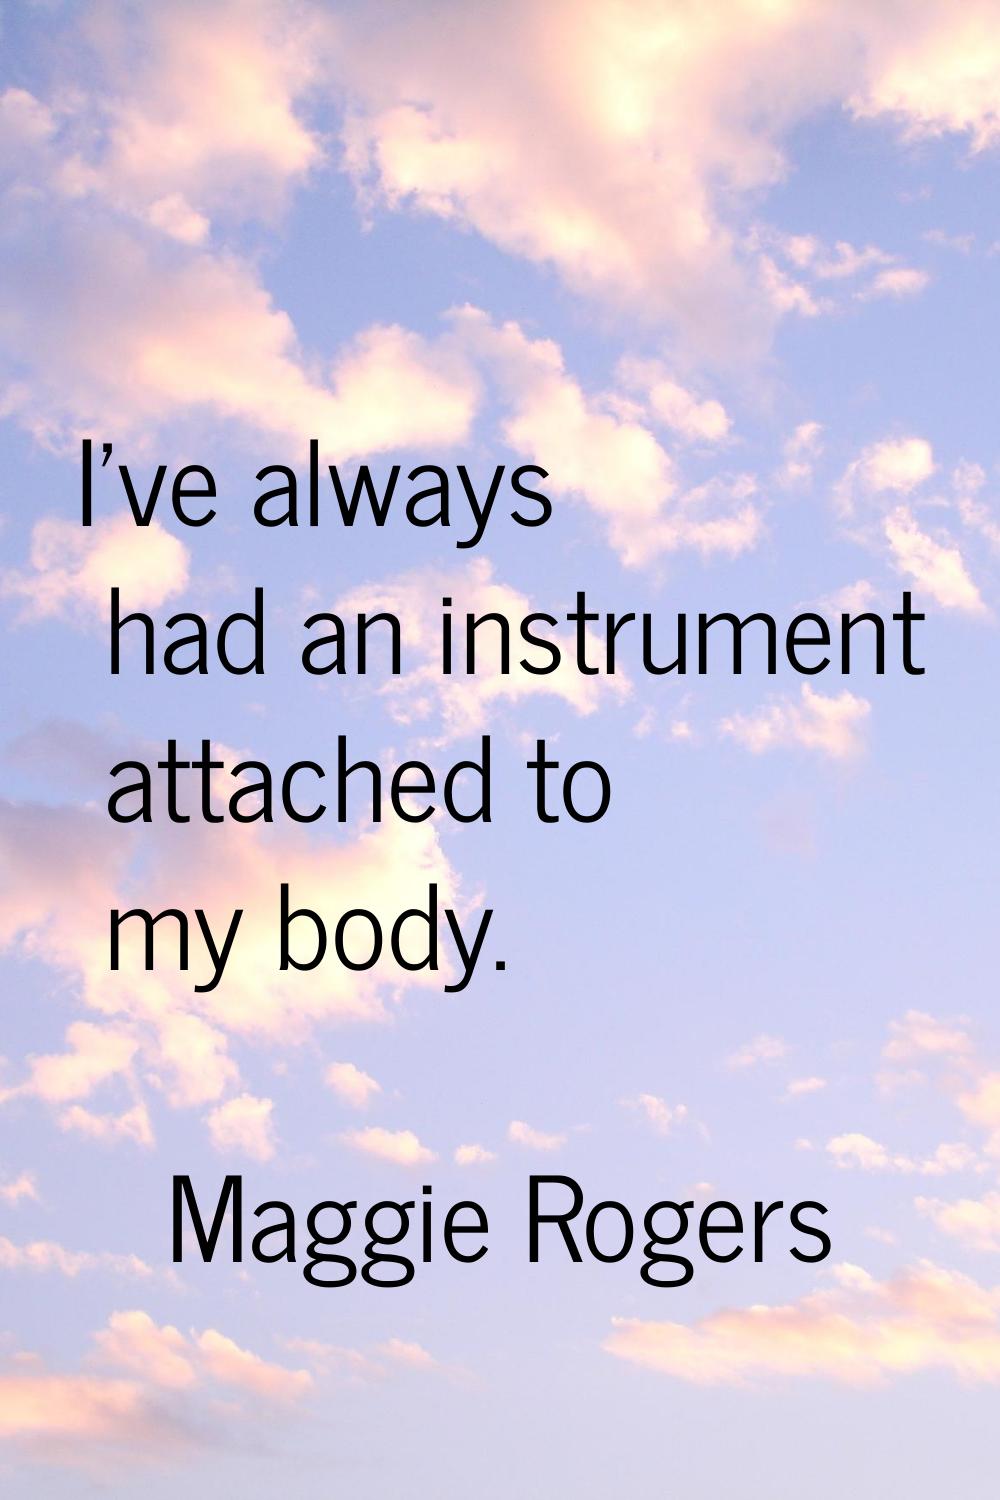 I've always had an instrument attached to my body.